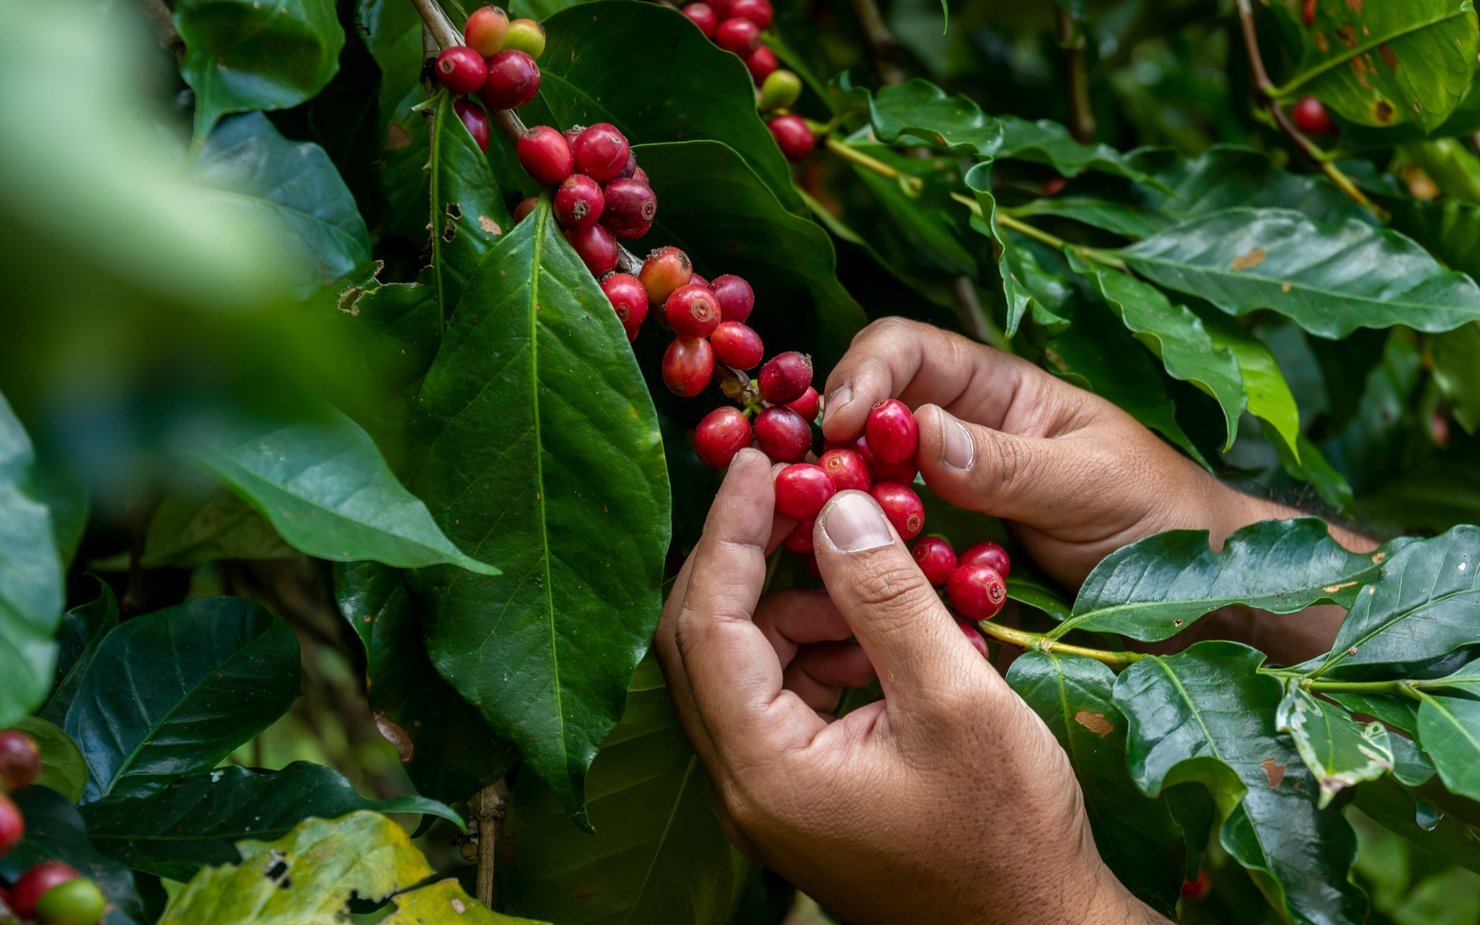 Hands picking coffee beans from a tree.